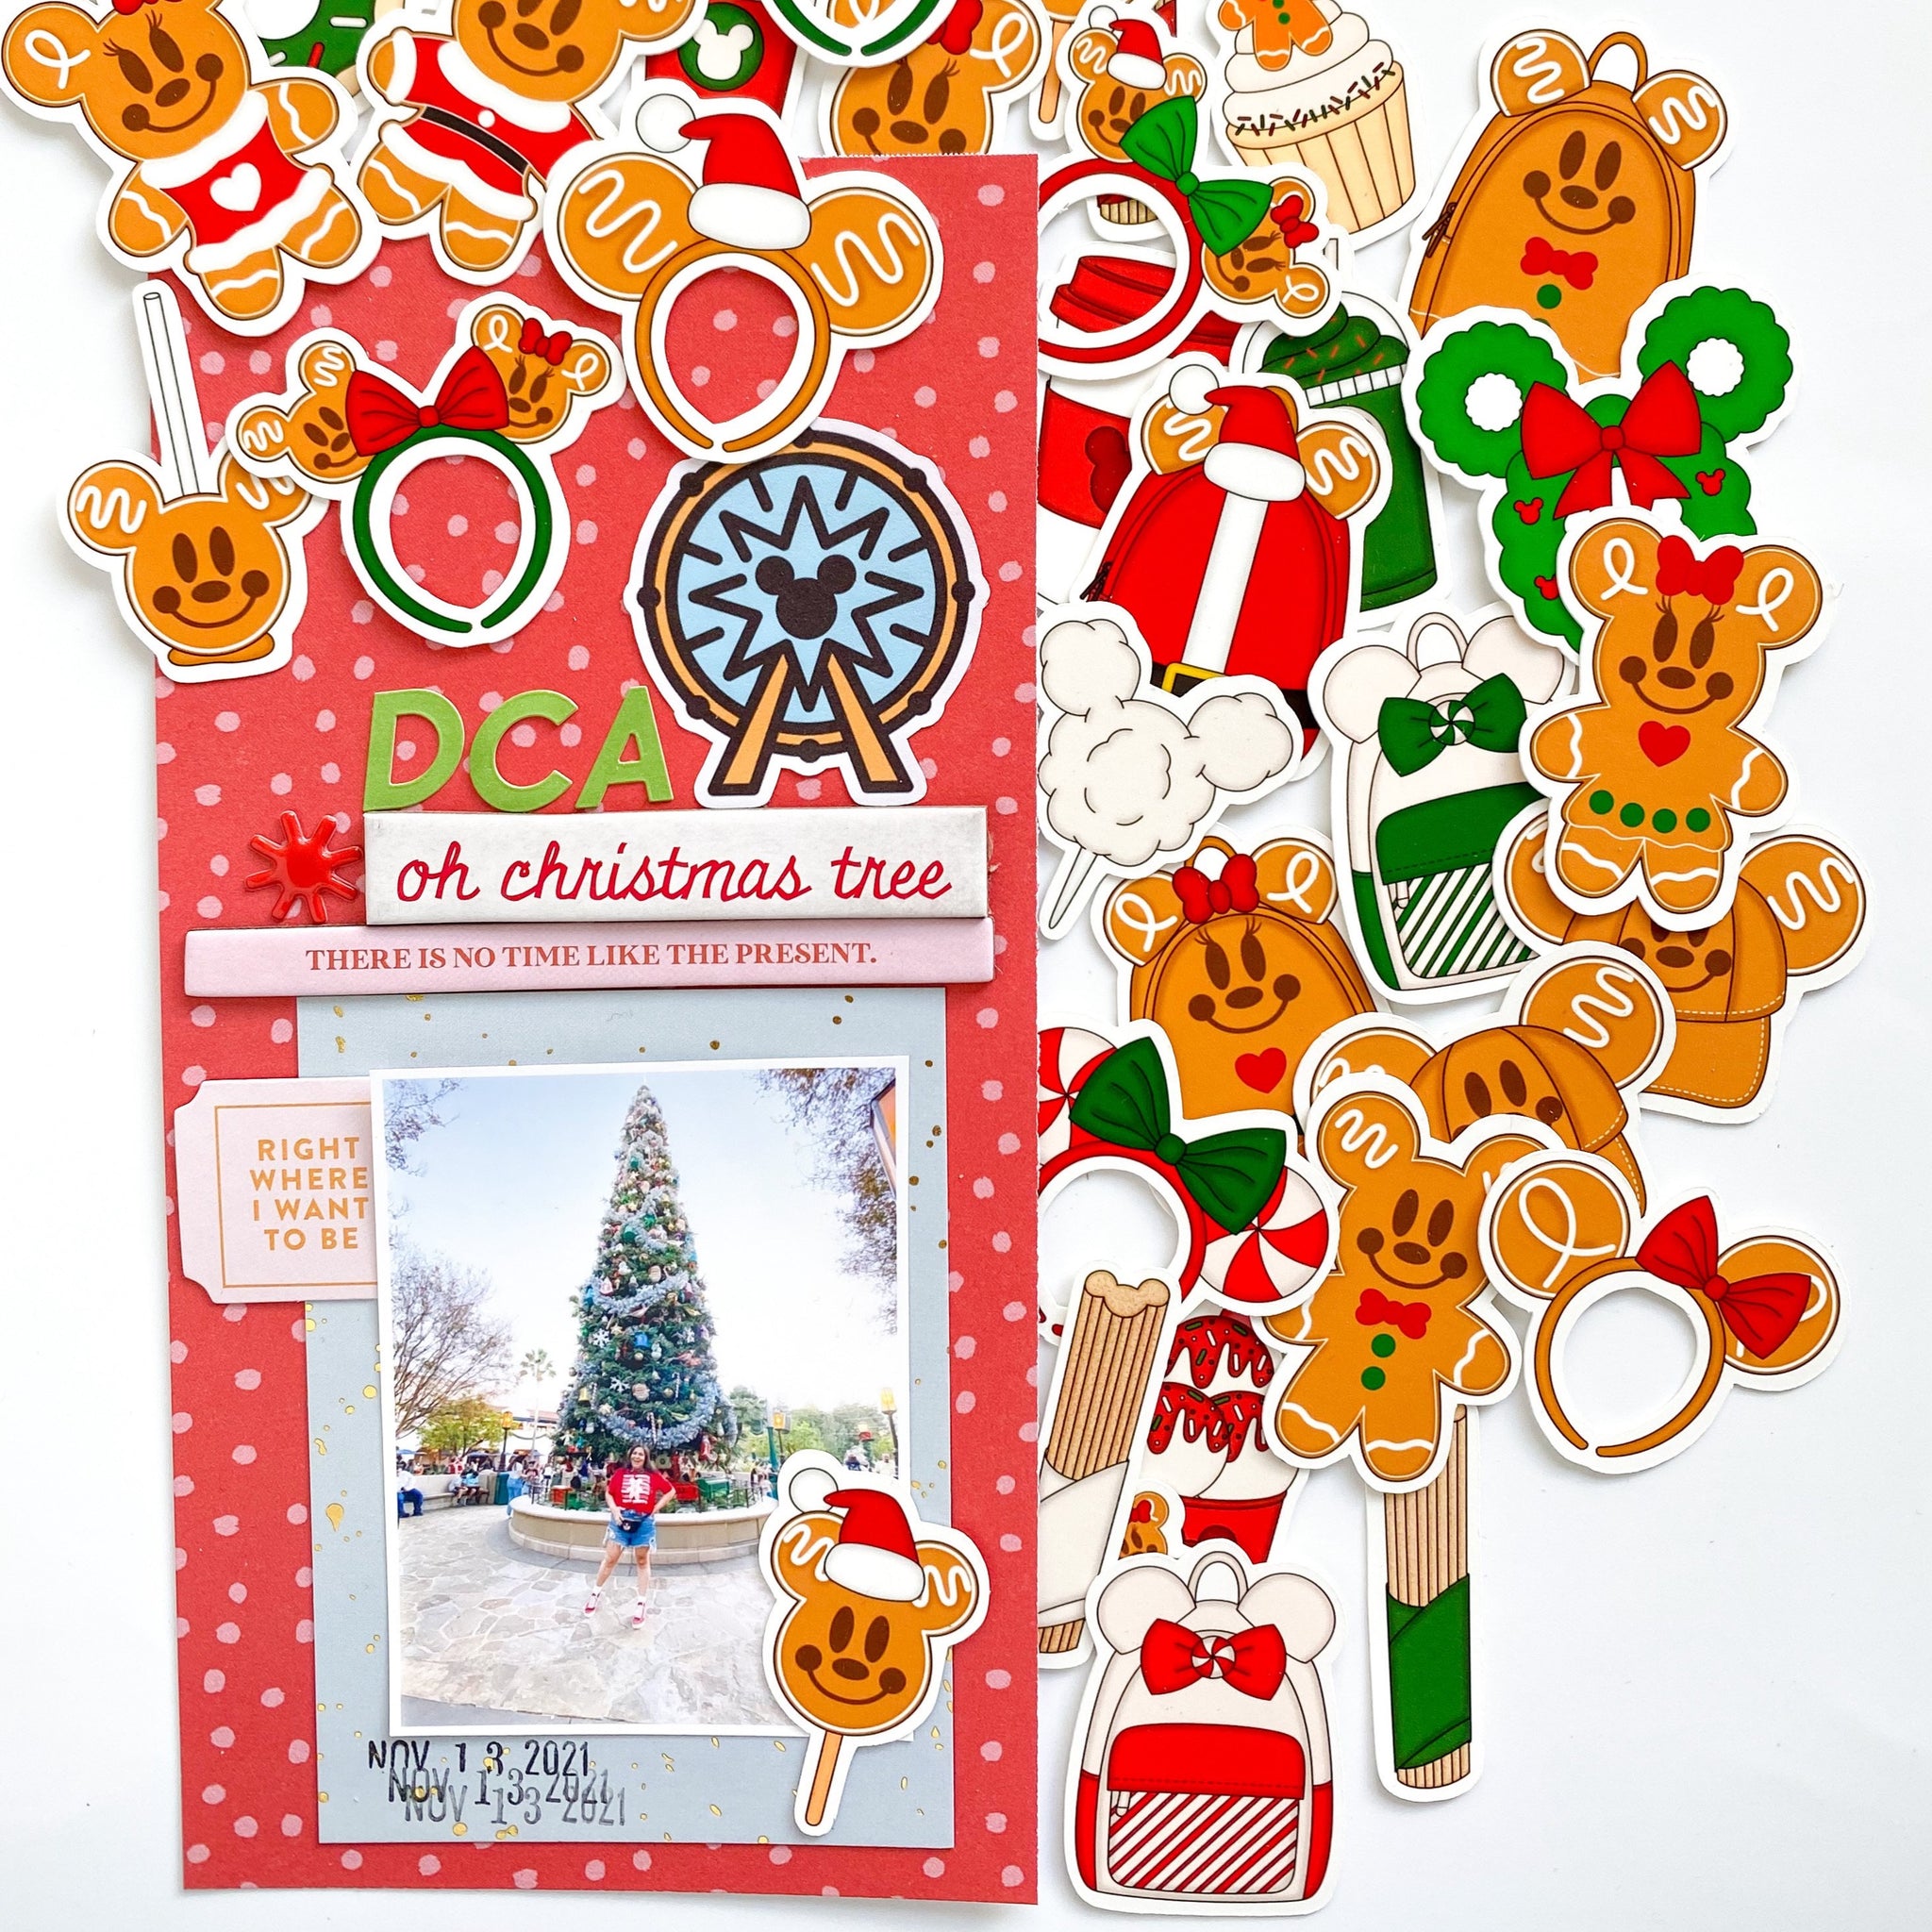 Gingerbread party mix, ephemera for DIY Christmas crafts, Christmas handmade cards, memory keeping items, Disney gingerbread cookies, Mickey Gingerbread cookie, paper crafting,